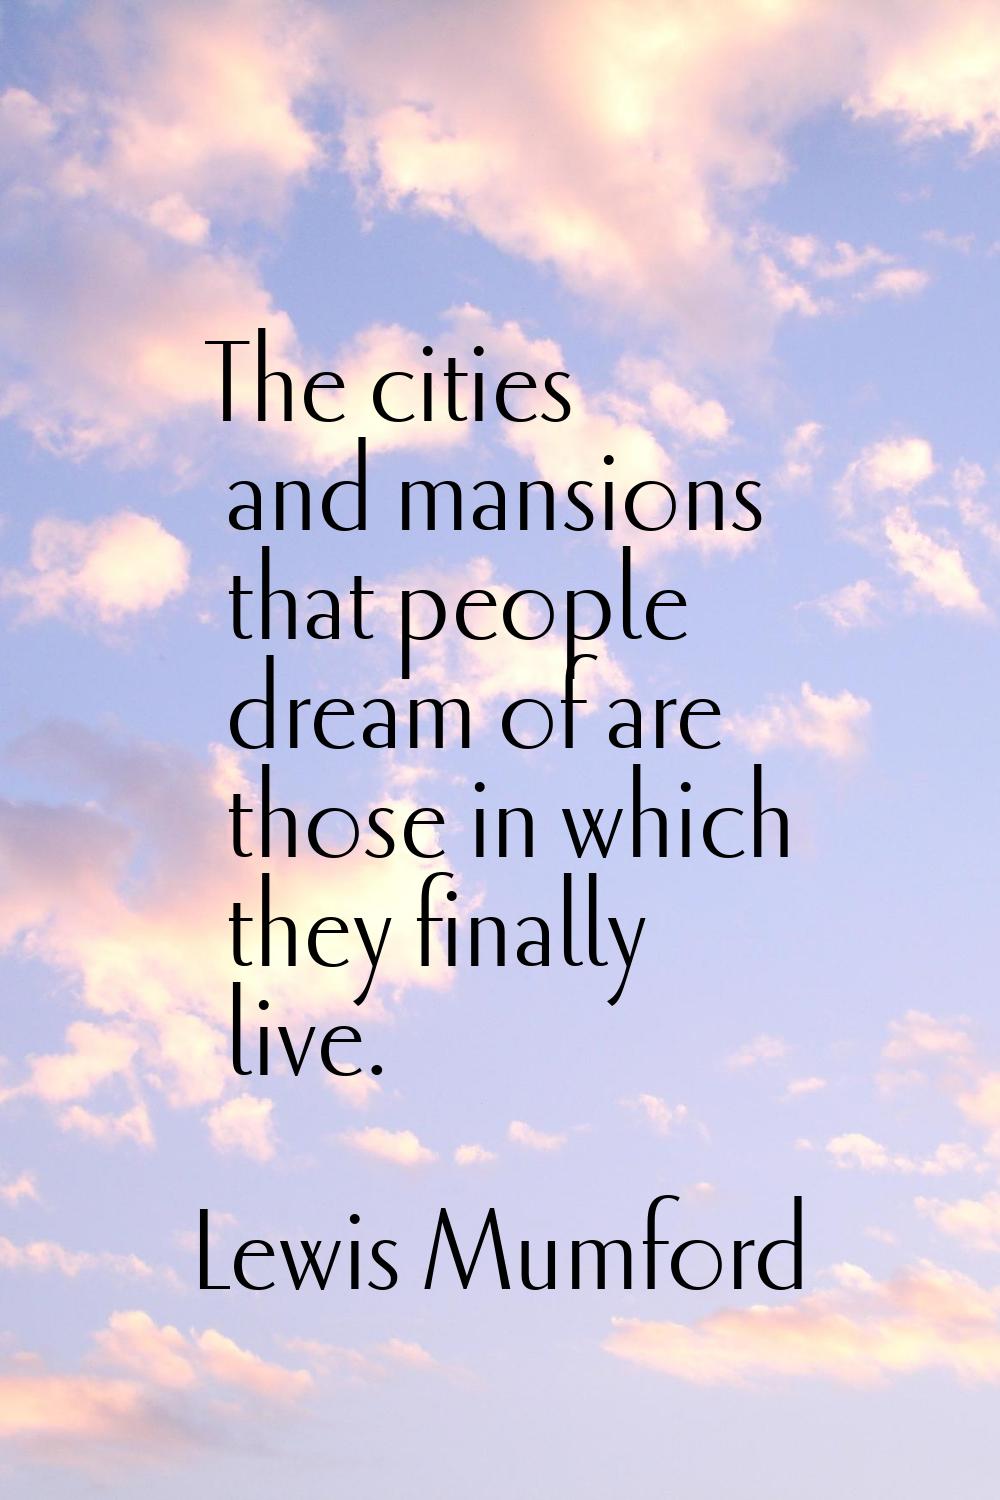 The cities and mansions that people dream of are those in which they finally live.